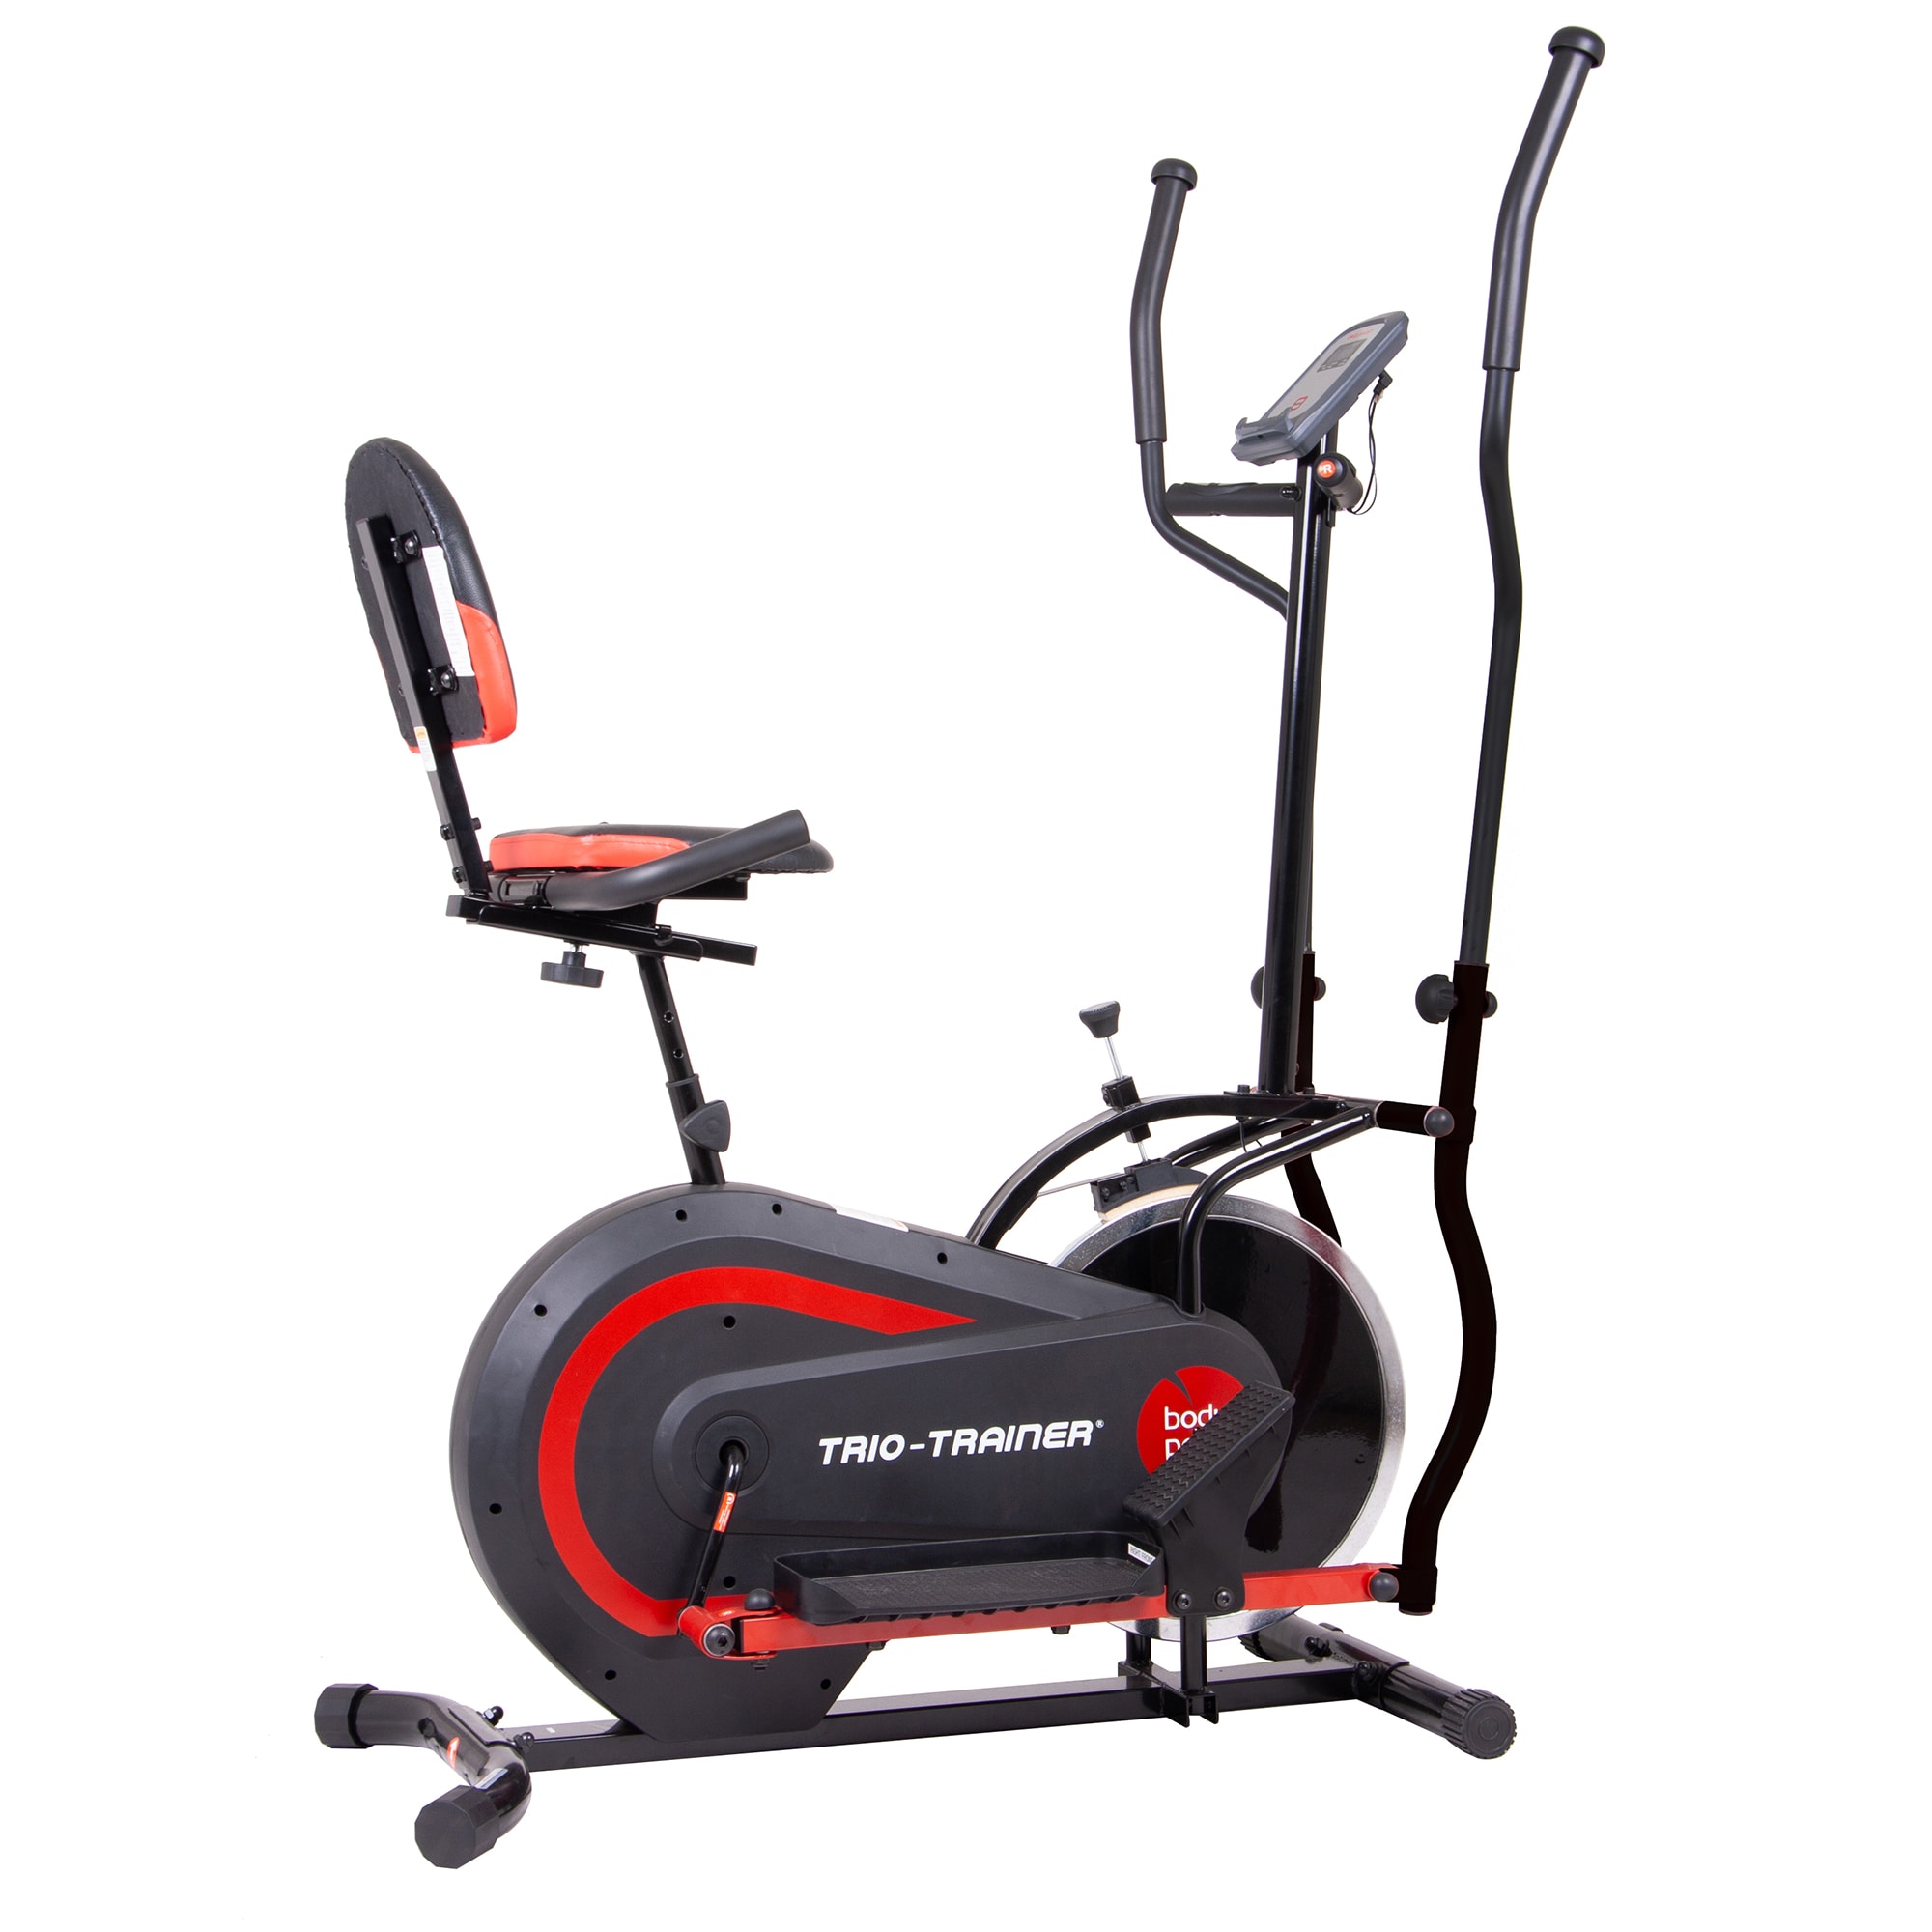 Charmant Nevelig Artistiek Body Flex Sports Body Power Fly Wheel Resistance Cross-trainer Elliptical  in the Ellipticals & Striders department at Lowes.com